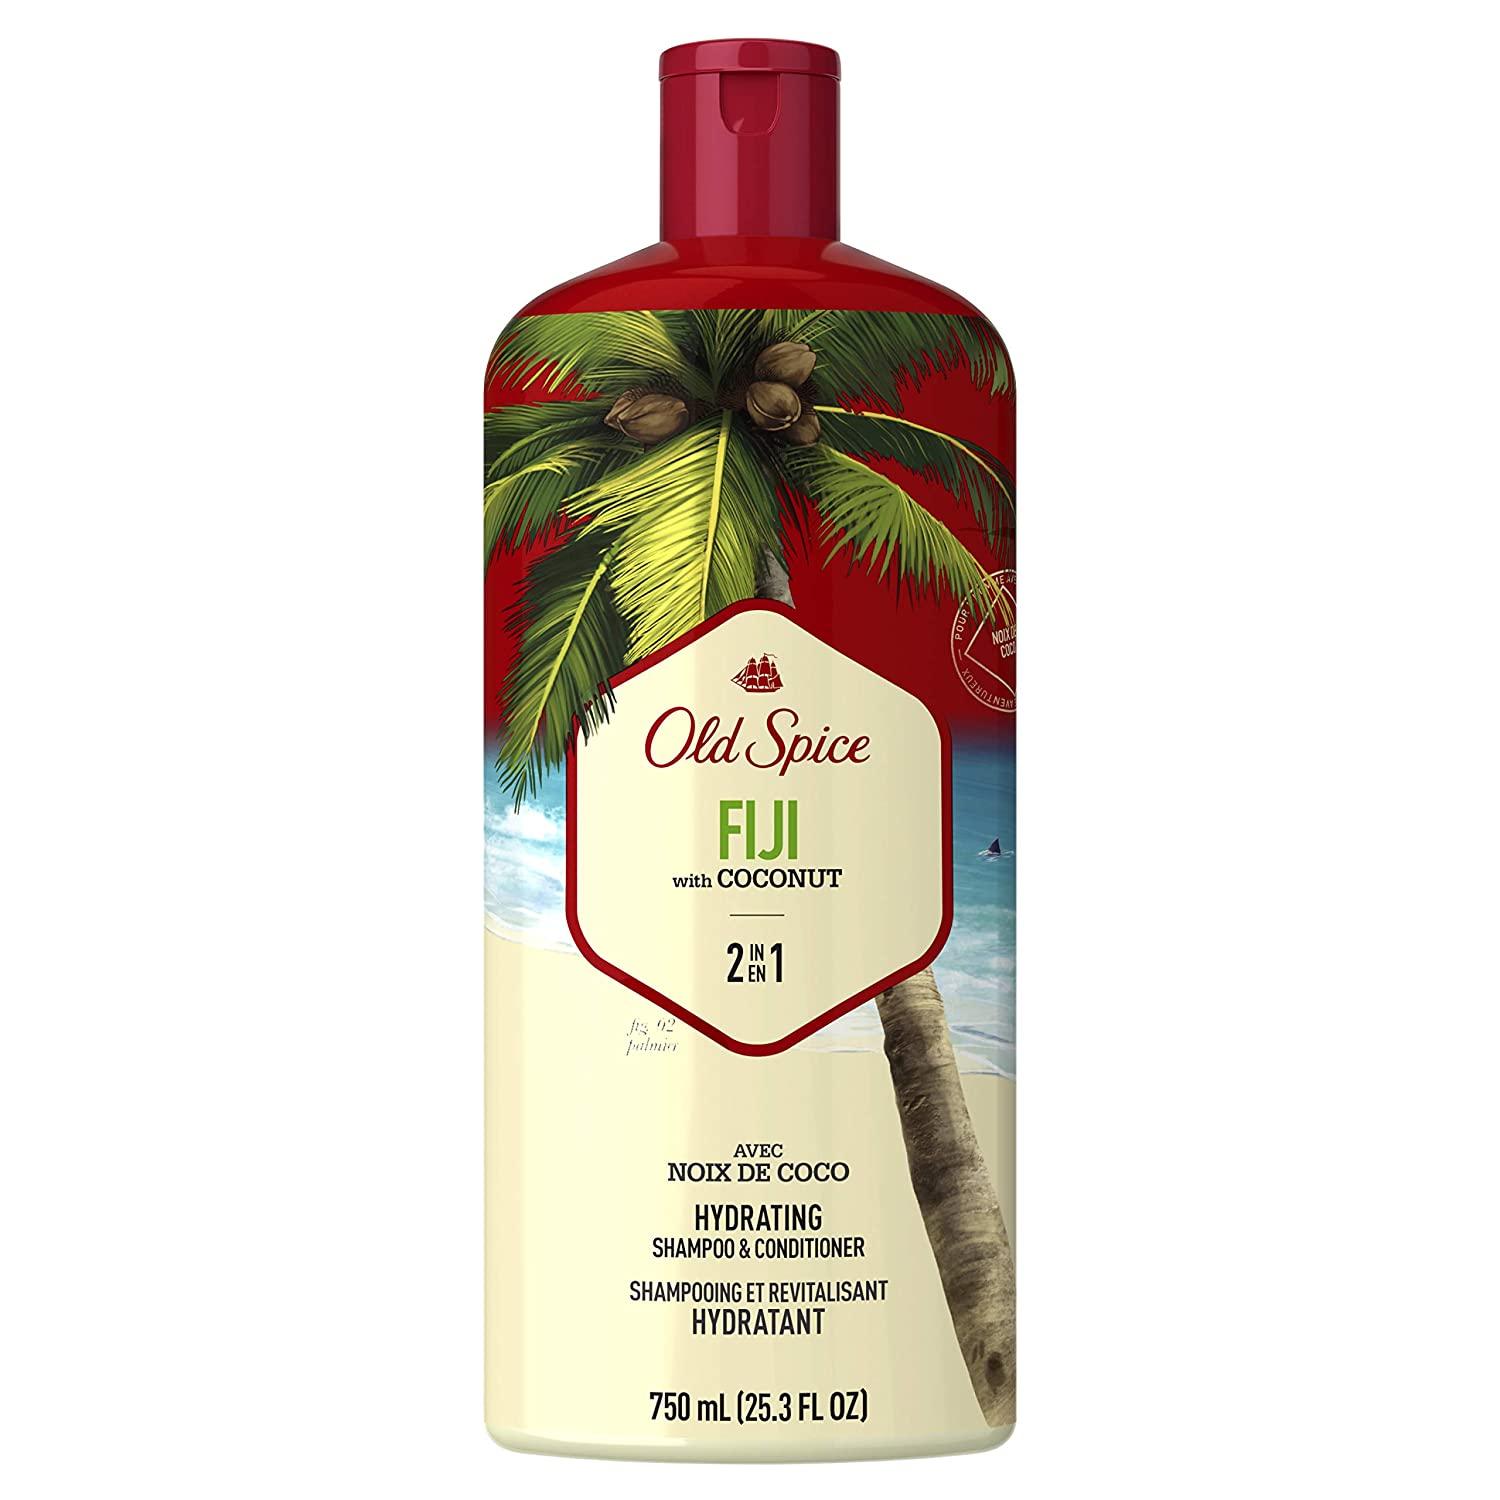 Old Spice Fiji Mens 2-in-1 Shampoo and Conditioner for $4.31 Shipped